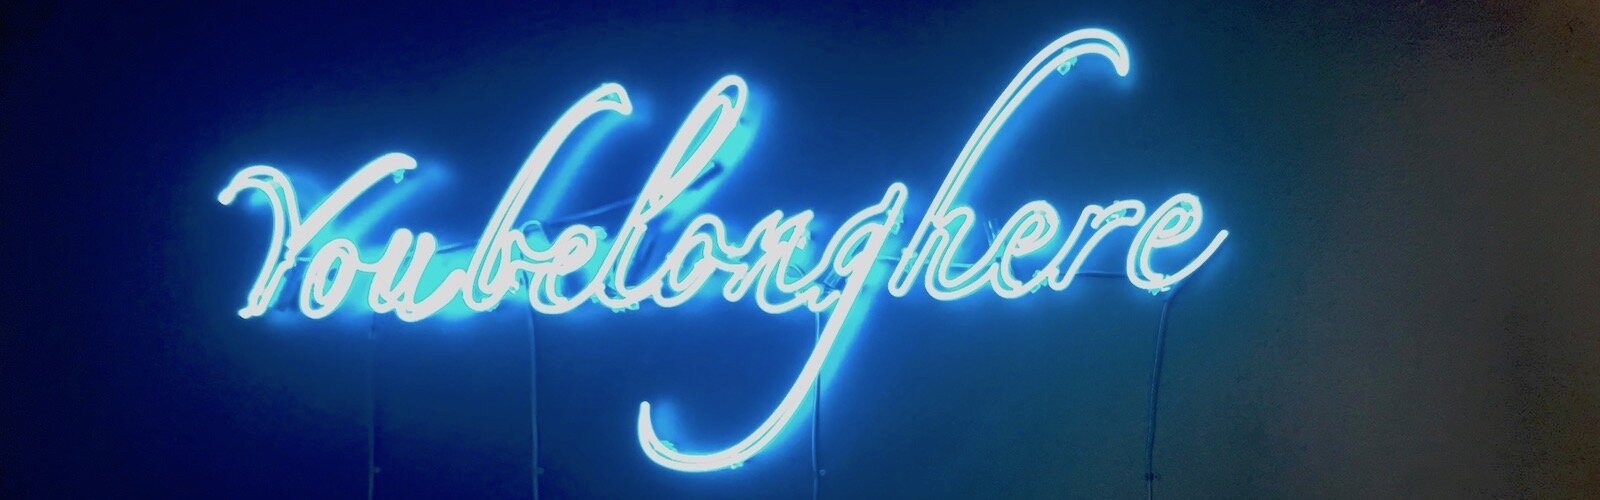 You Belong Here neon light artwork on display at Scarfone/Hartley Gallery in Tampa.